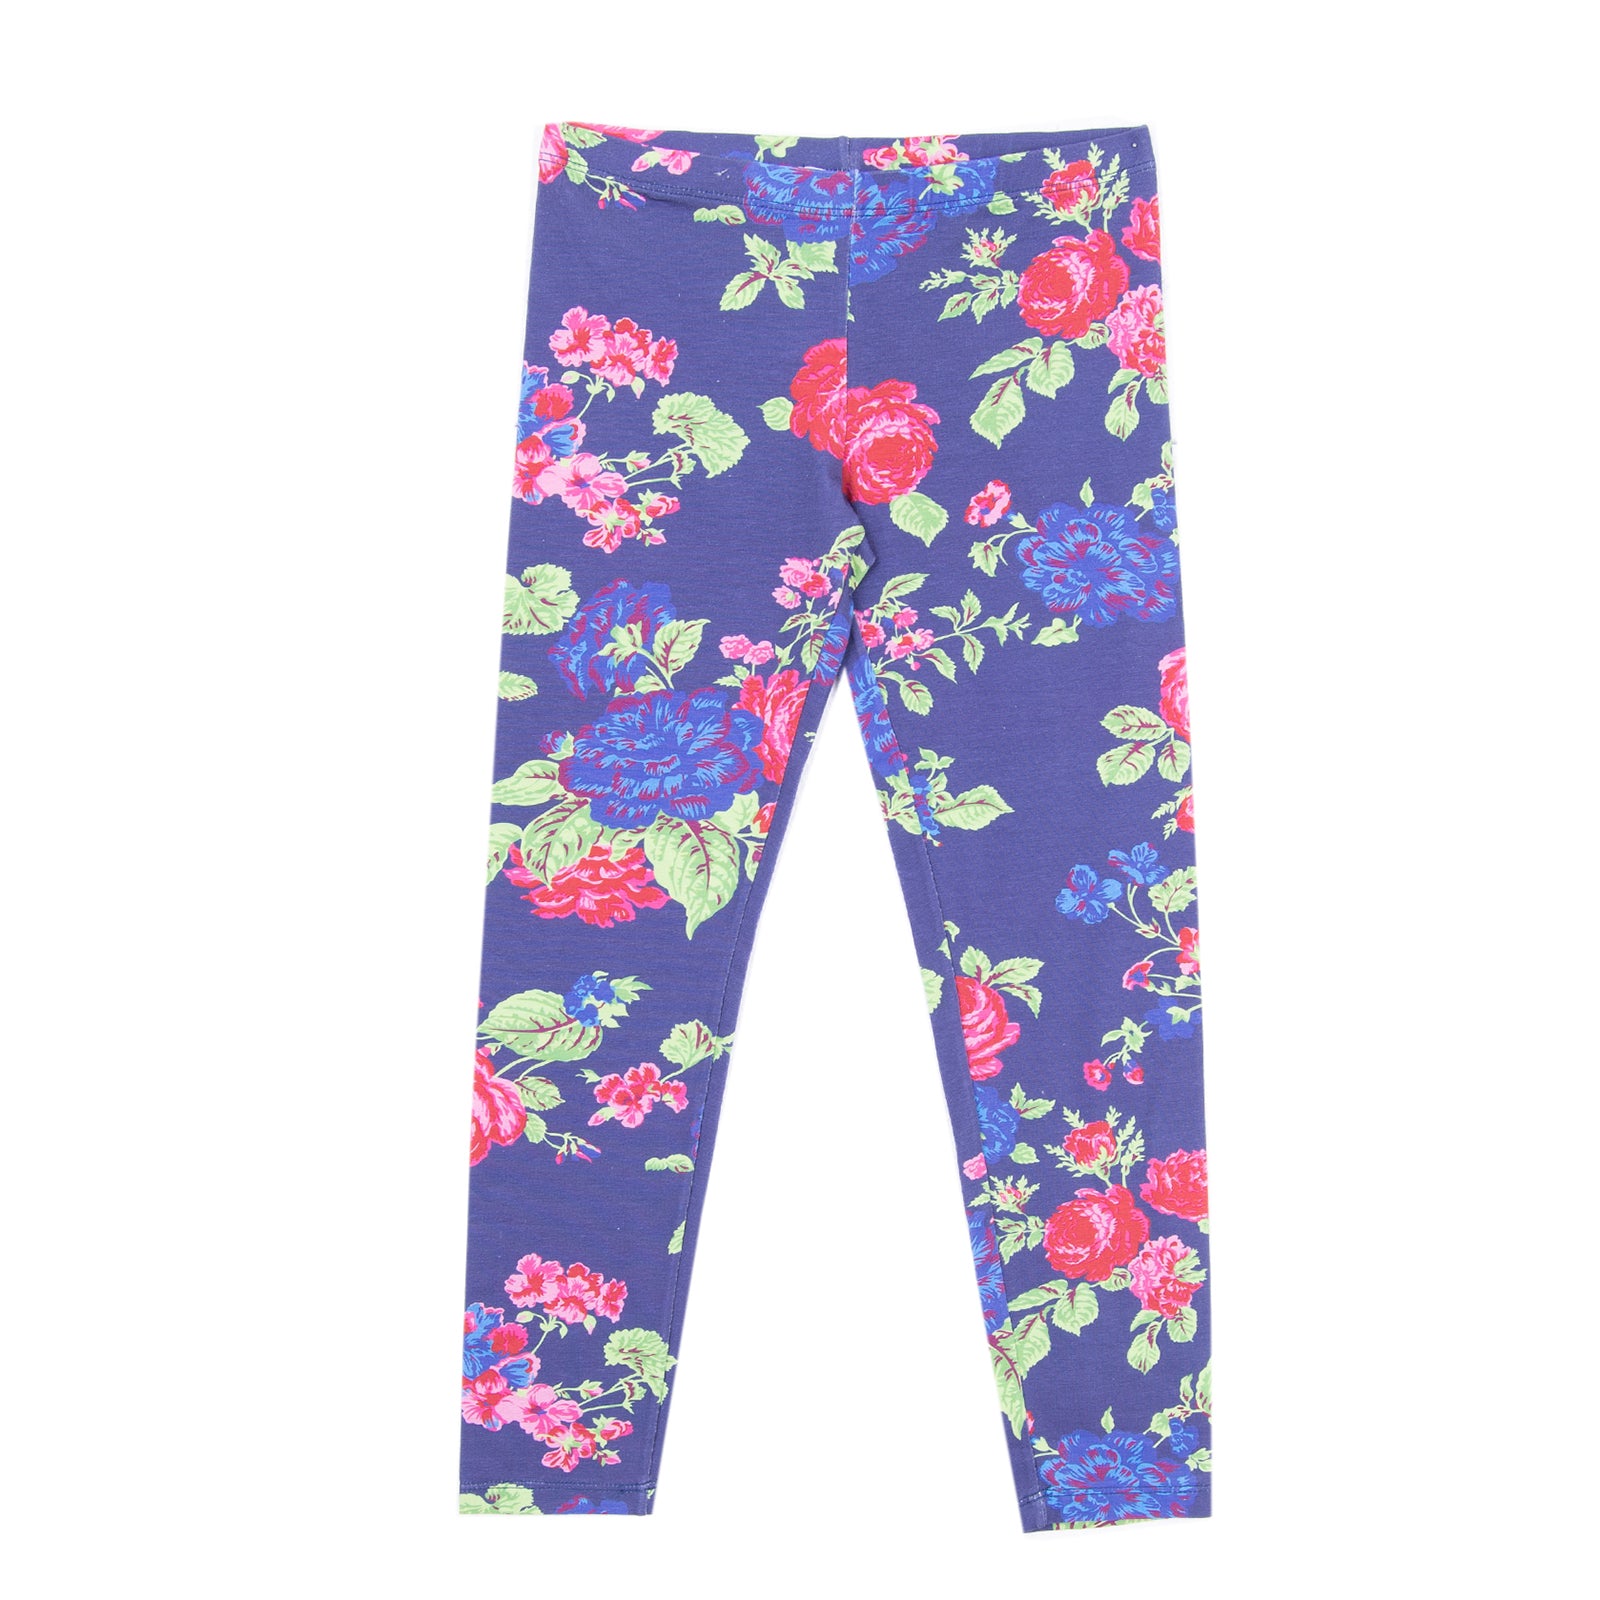 MSGM KIDS Leggings Size 8Y Floral Pattern Made in Italy gallery main photo